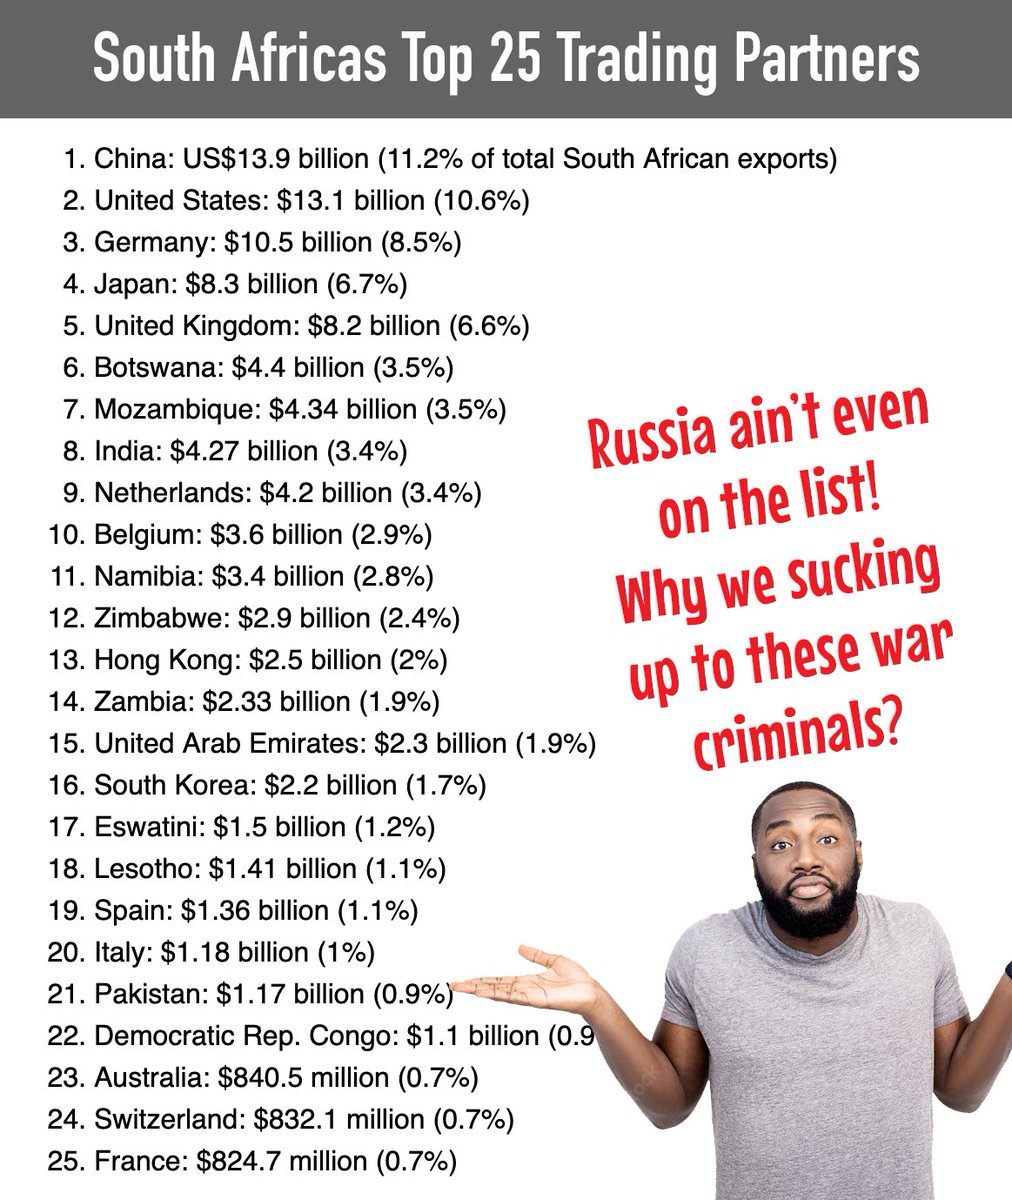 I really cannot understand why South Africa feel so obliged to support Russia? Apart from merely inconveniencing South Africa and exporting it useless ideology, what does South Africa gain from Russia?